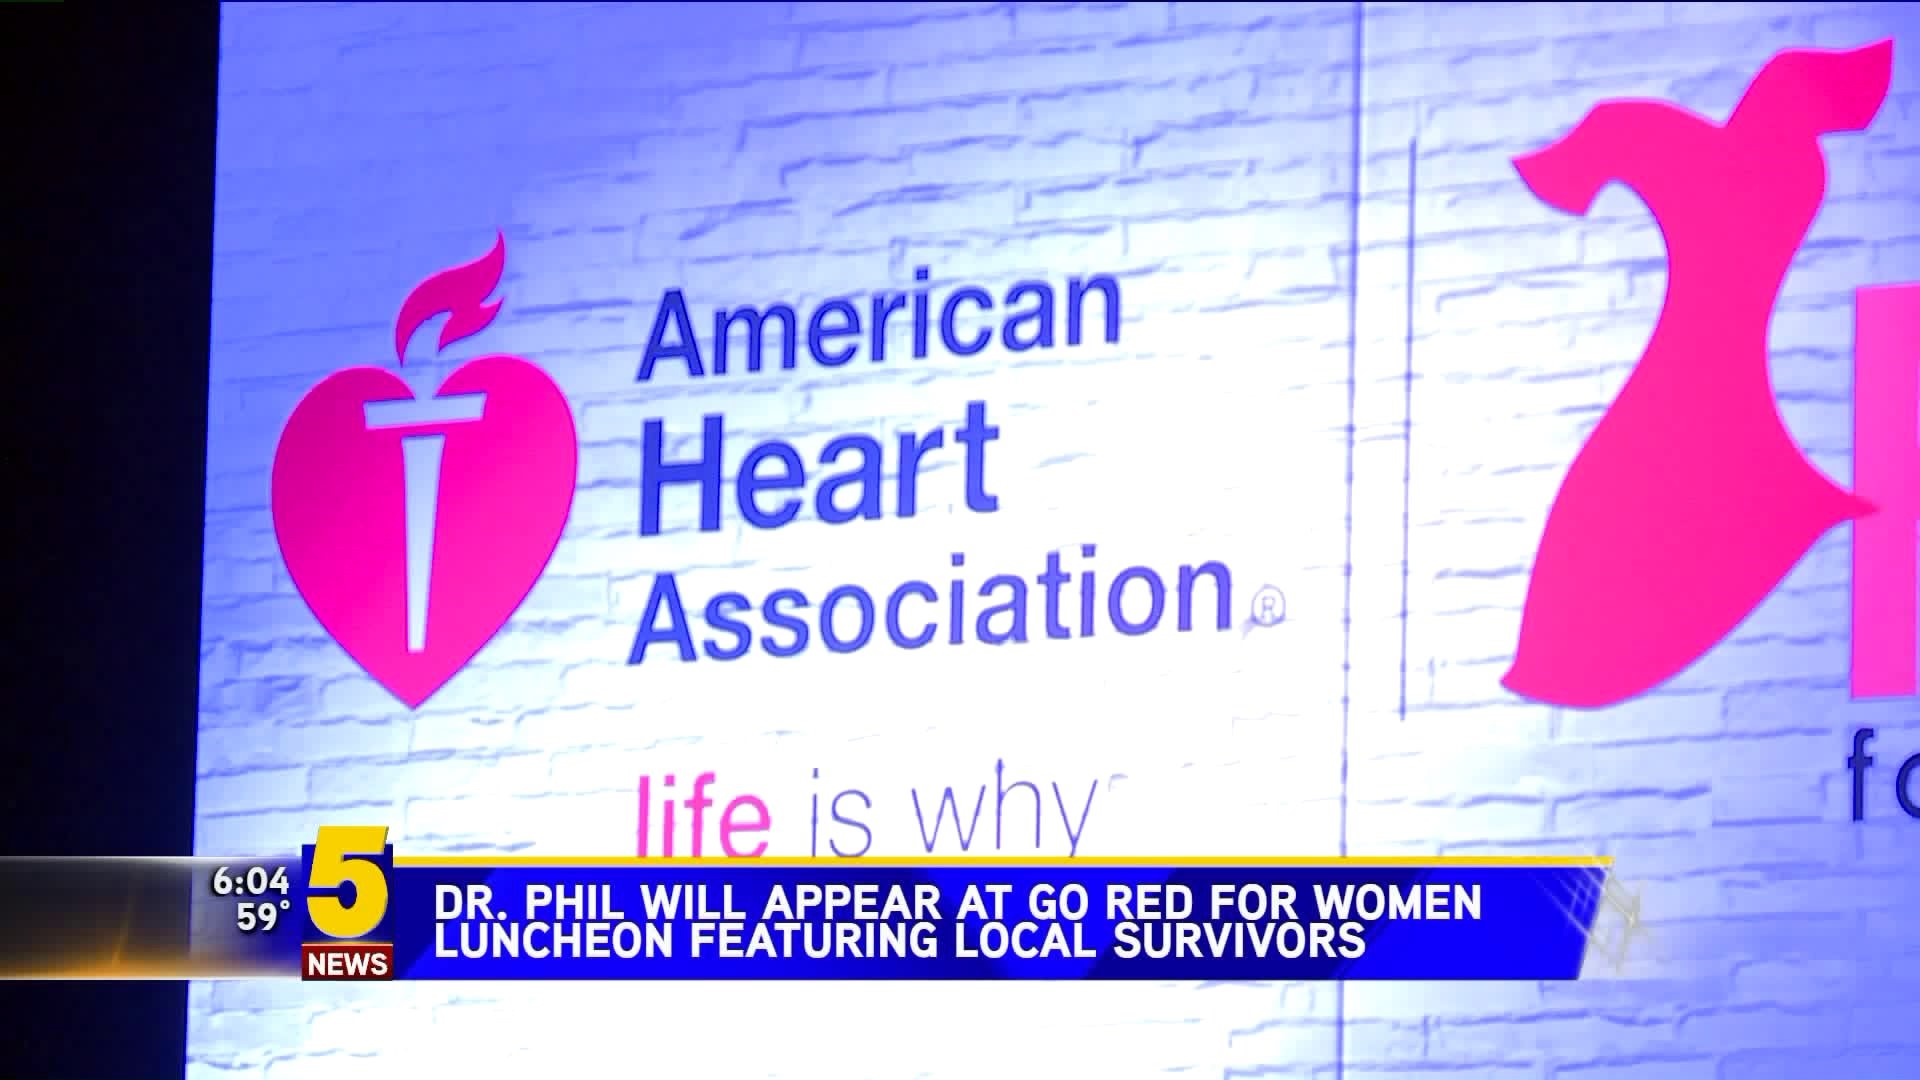 Dr. Phil Will Appear At Go Red For Women Luncheon